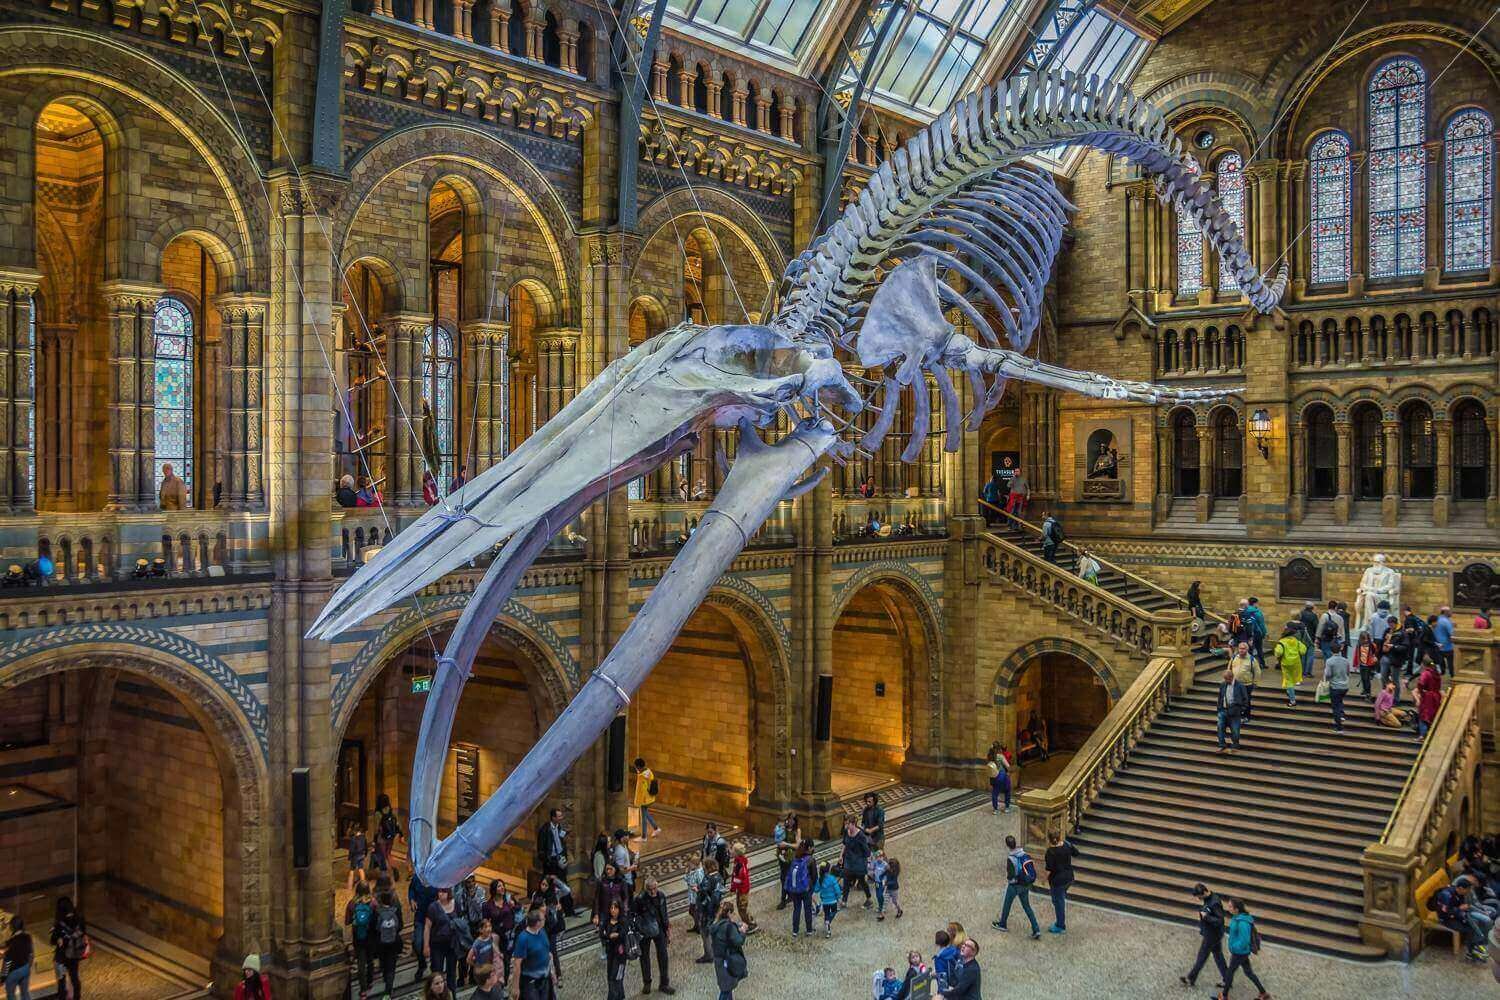 Explore the most visited museums in the UK, including the British Museum, National Gallery, Victoria & Albert Museum, Natural History Museum,